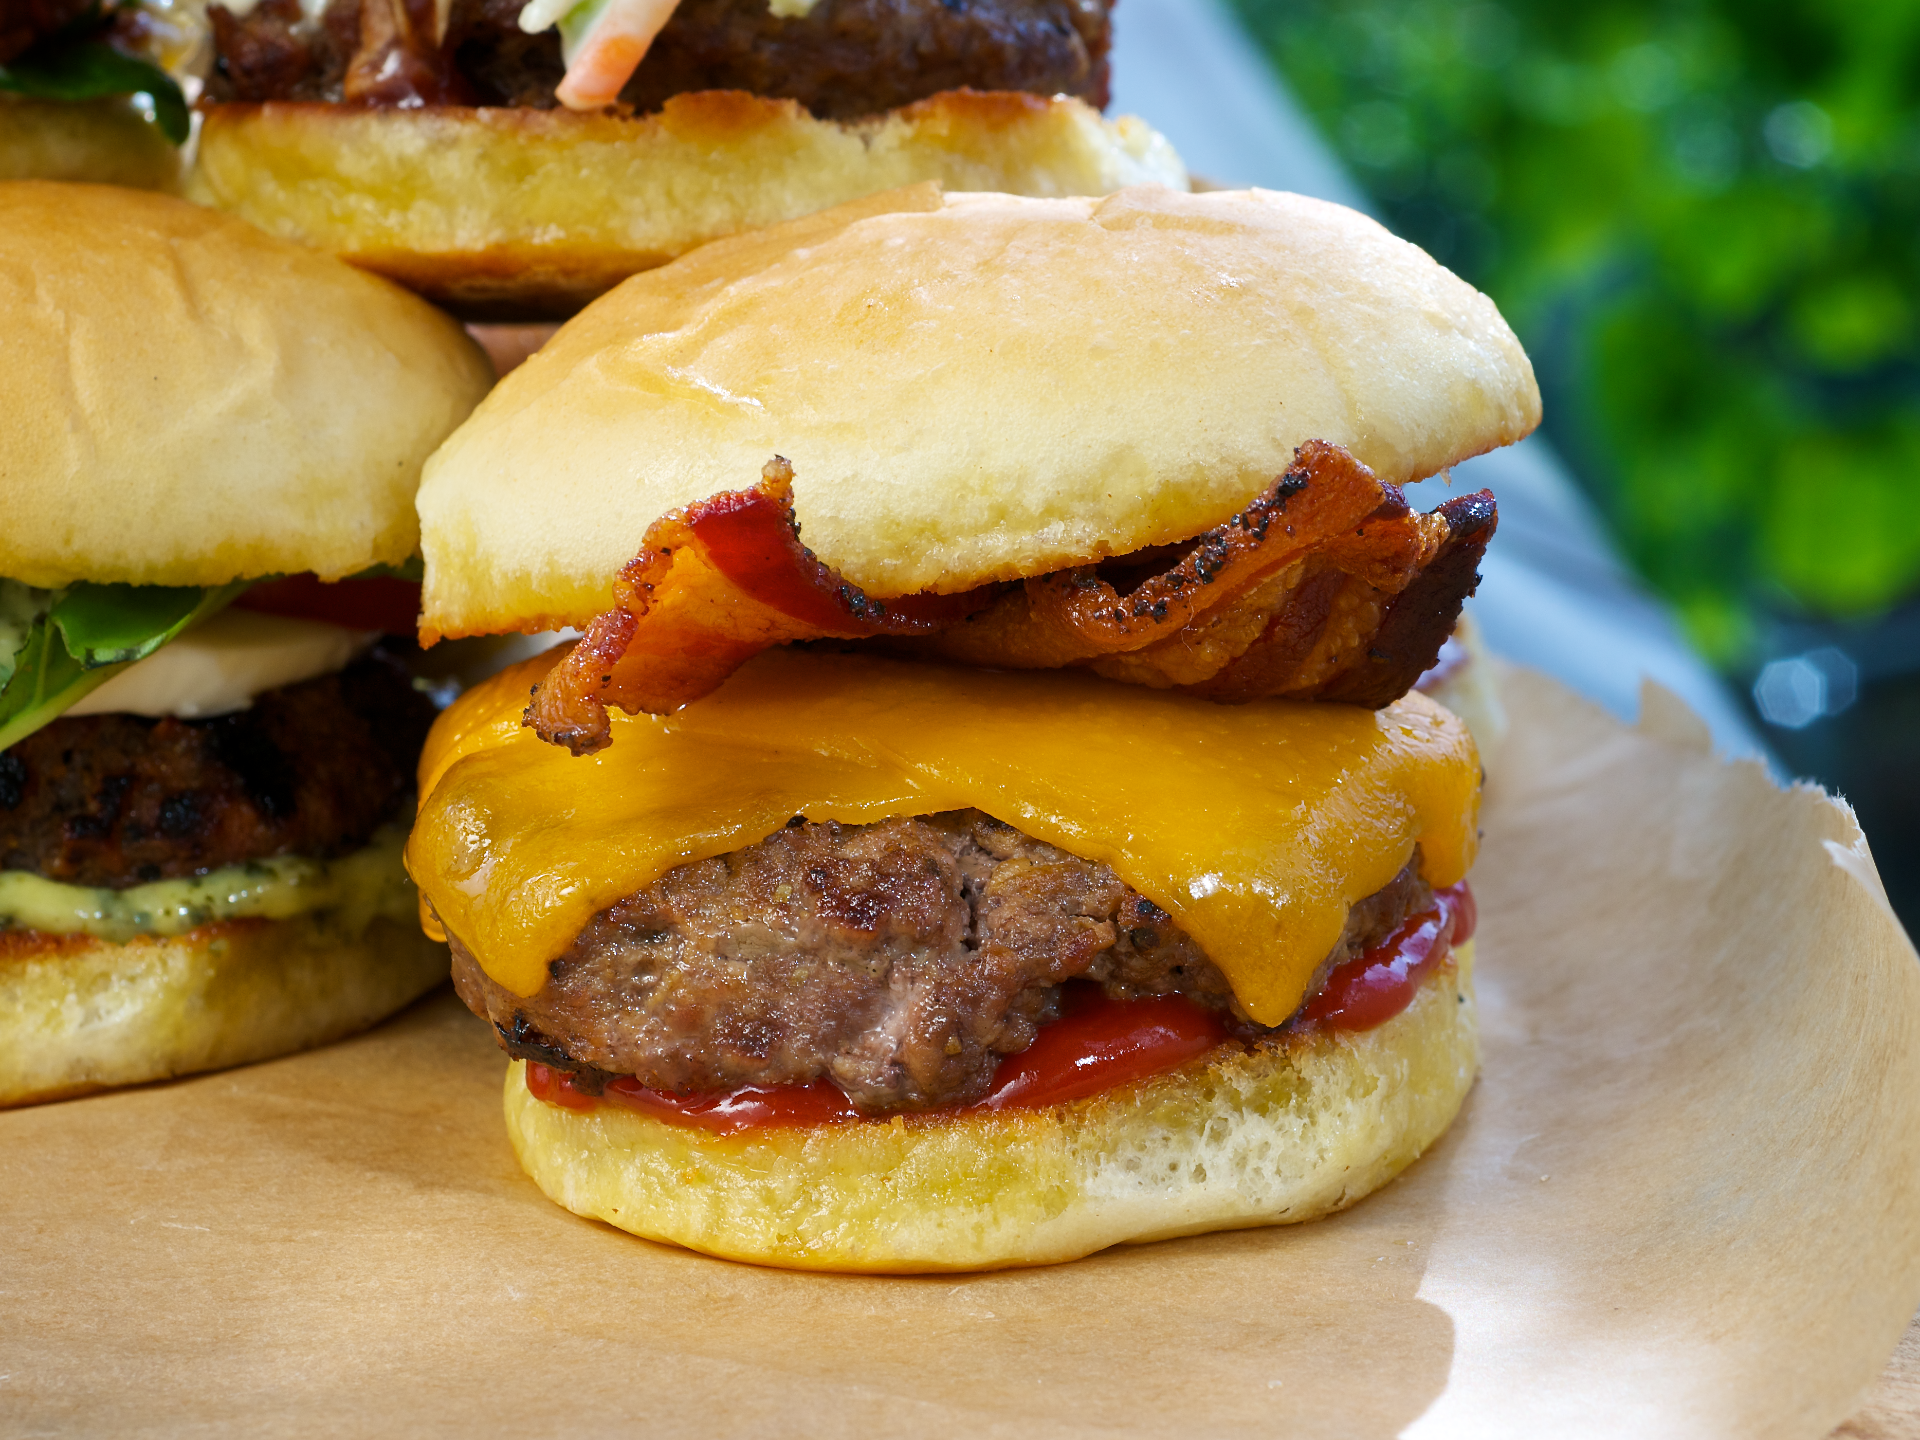 The traditional, indulgent, American cheeseburger slider, topped with smoky bacon!